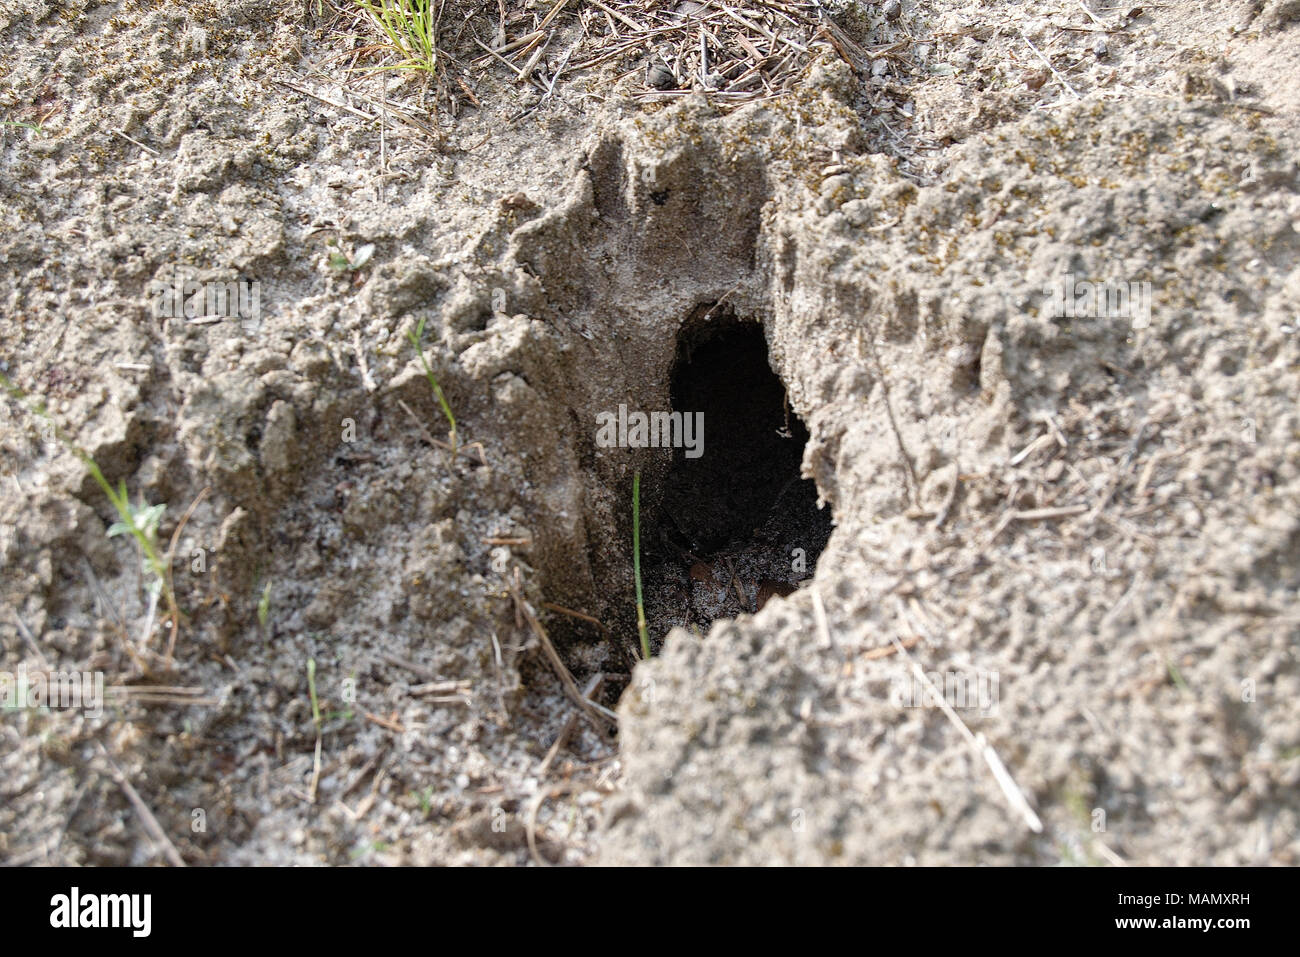 Snake or rabbit hole in the ground of sandy loam Stock Photo